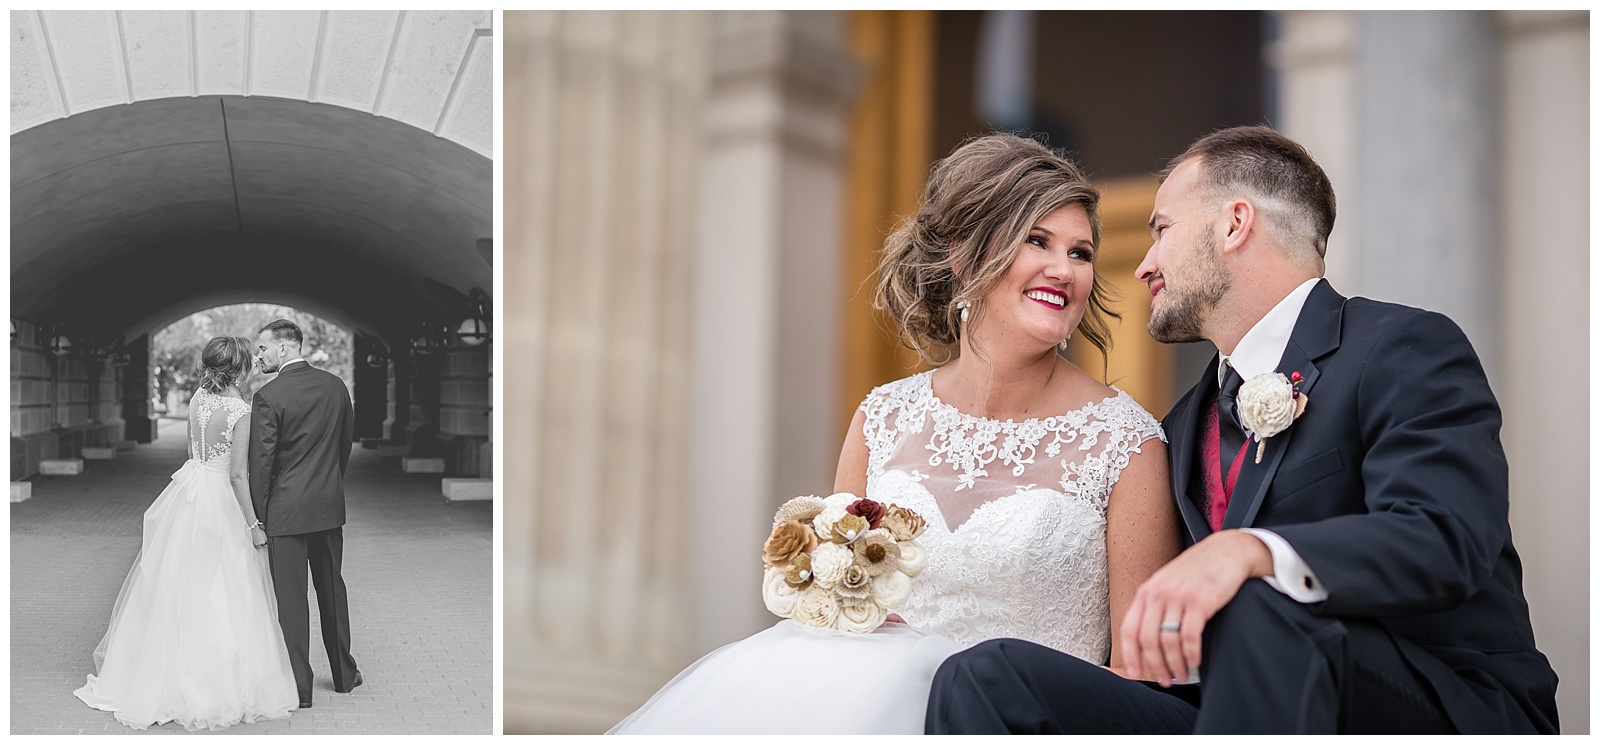 Wedding photography at the Kansas State Capitol Building in Topeka.